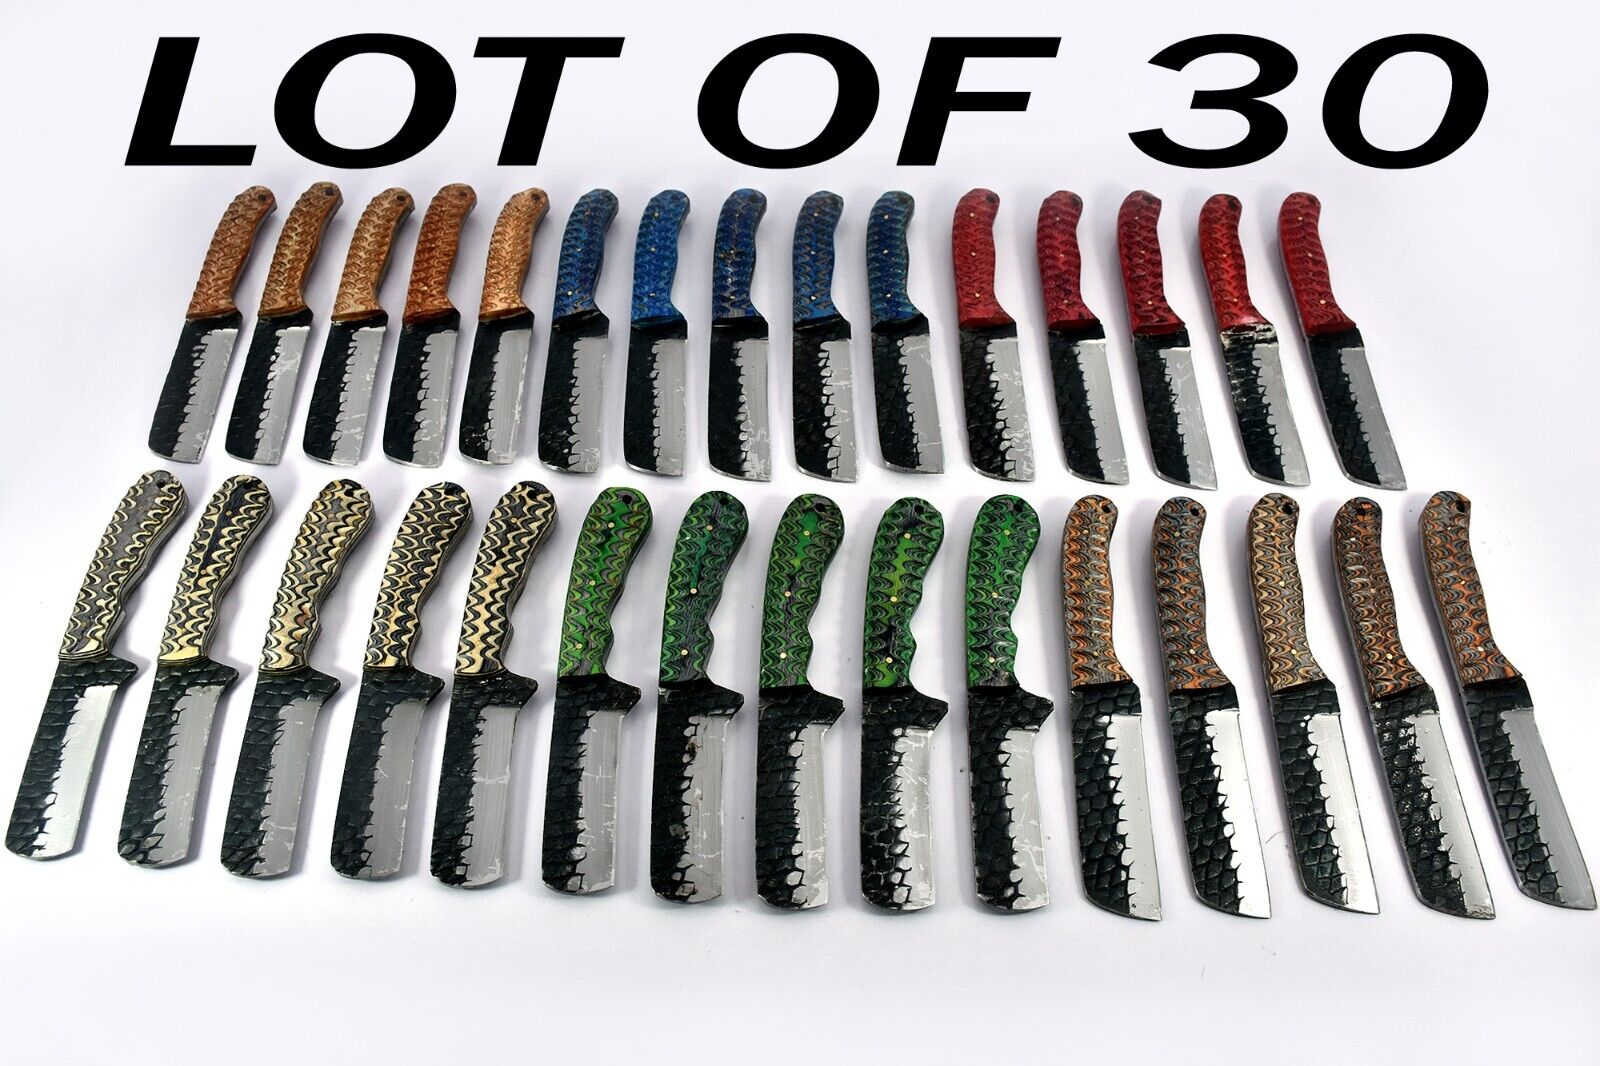 30 pieces Carbon steel Bull cuter knives with leather sheath UM-5045